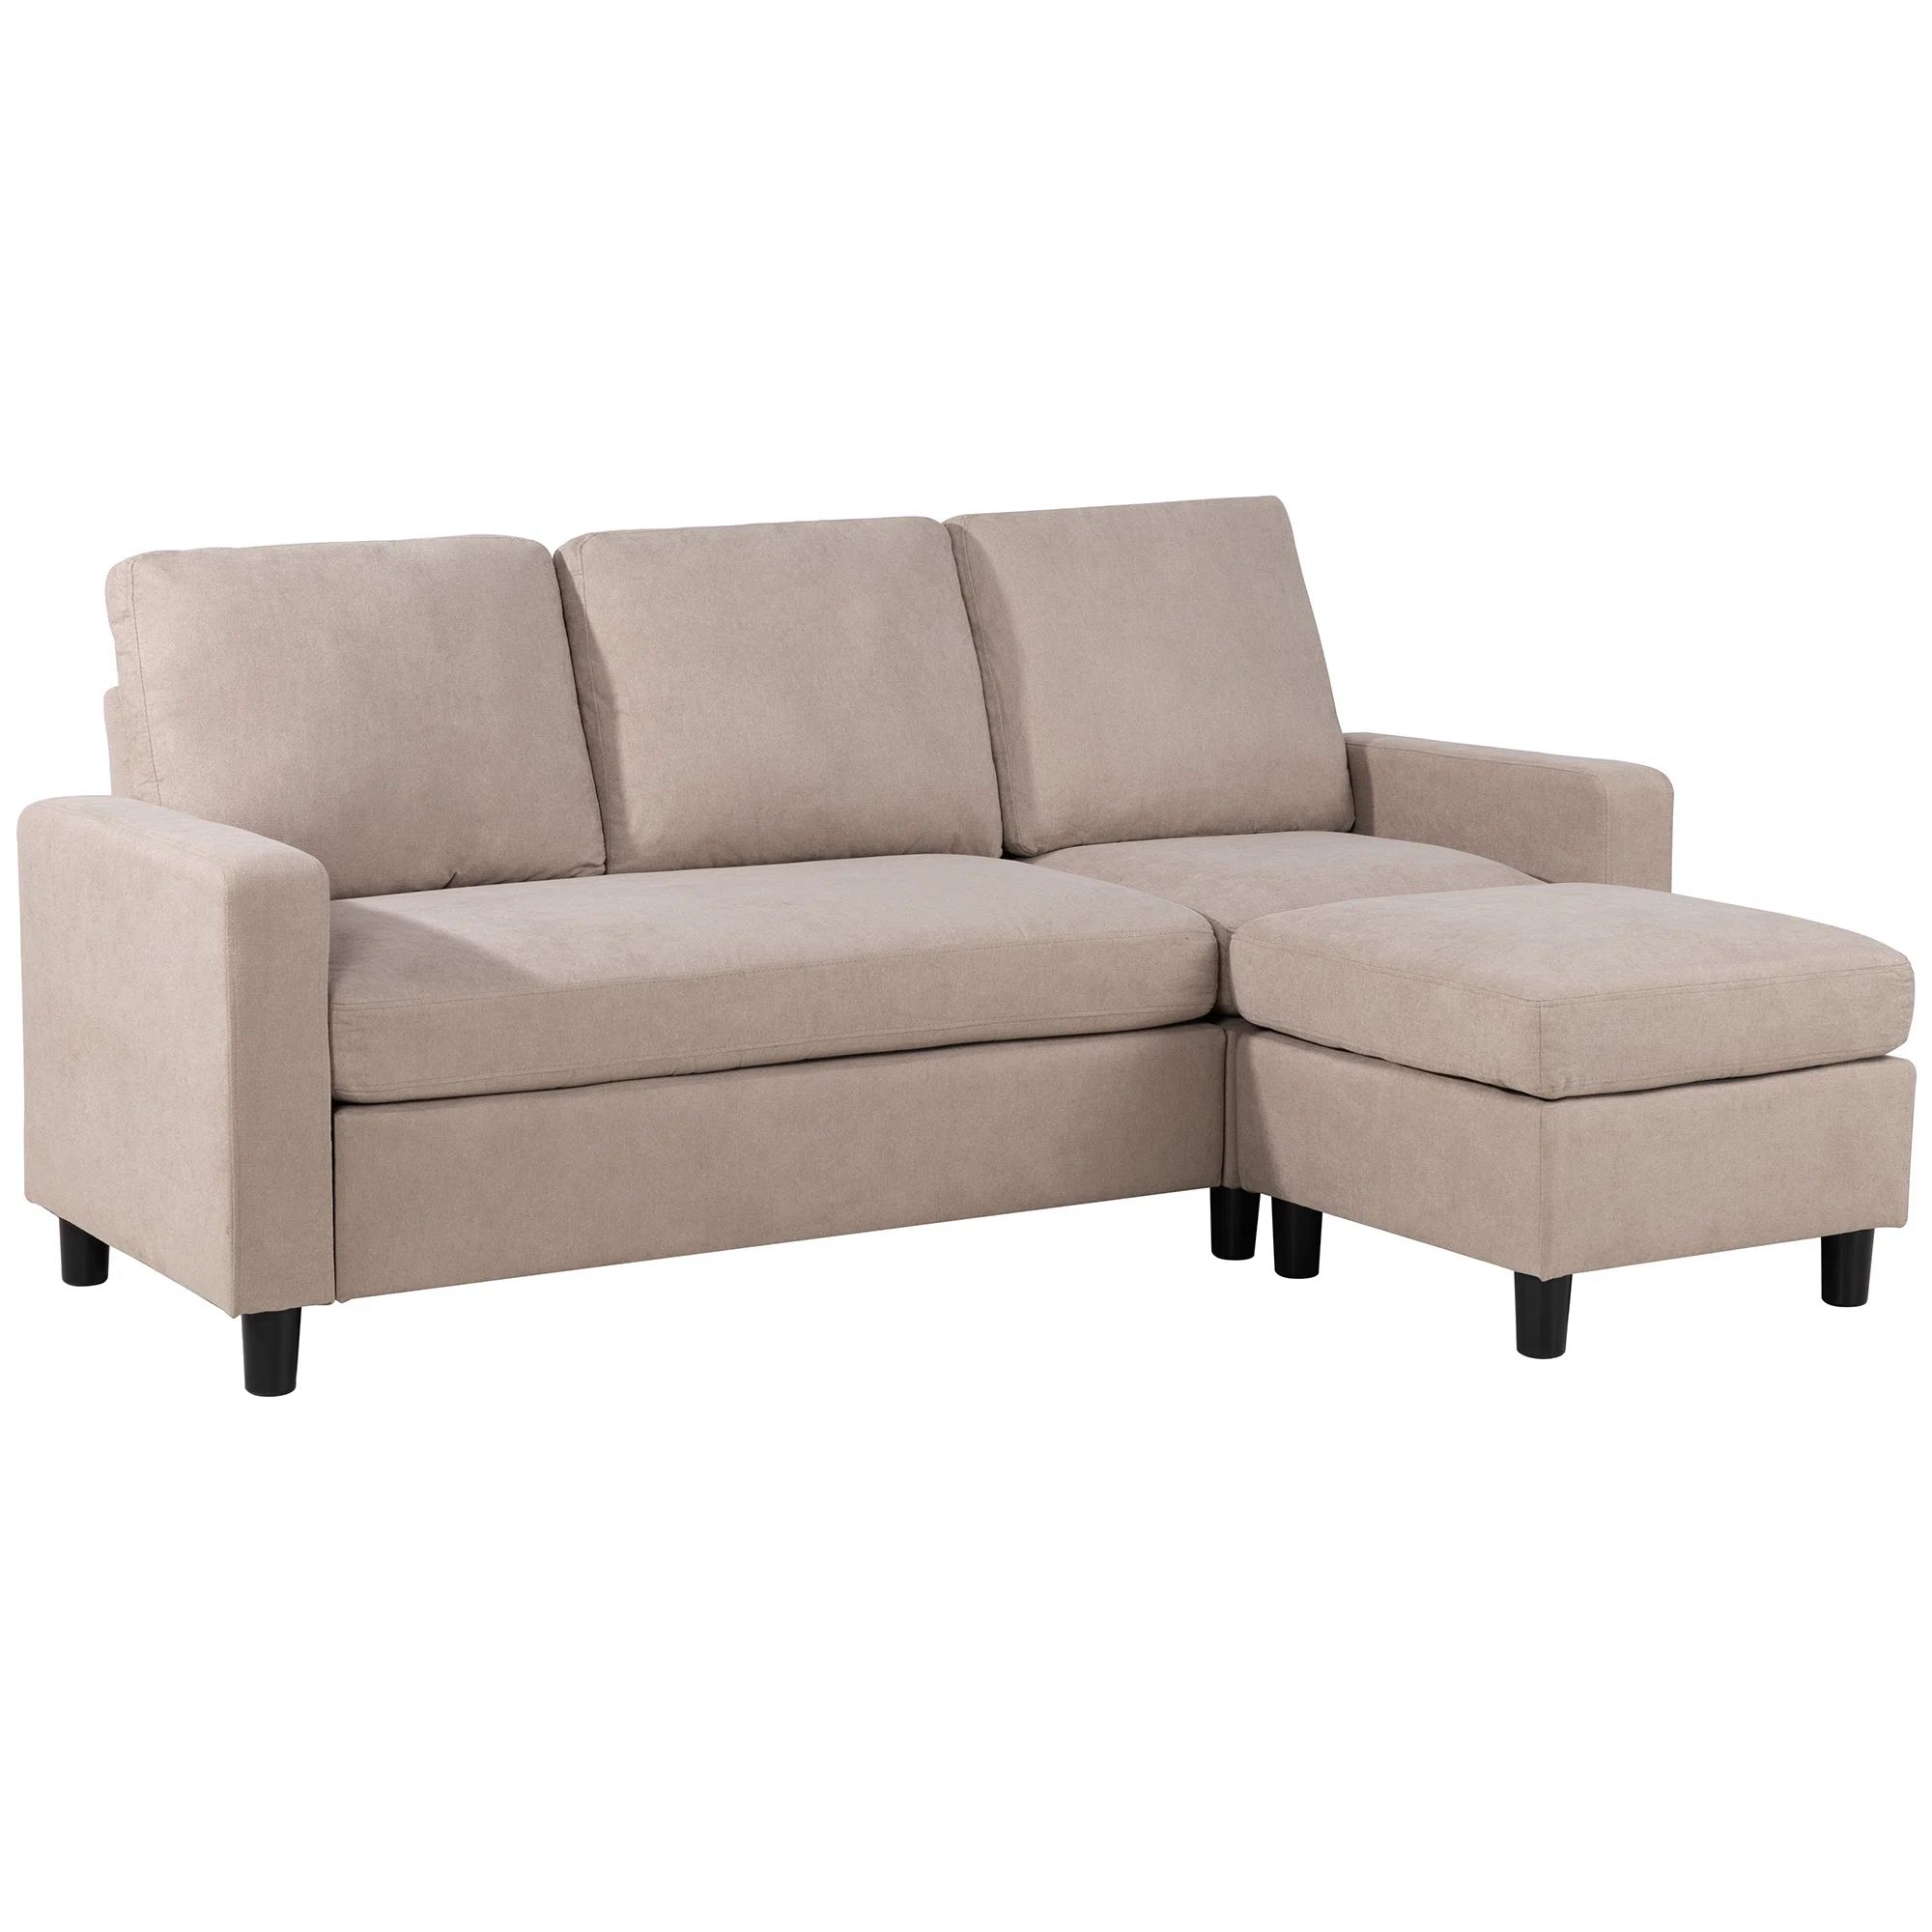 Harbuck 77.55" Wide Reversible Sofa & Chaise with Ottoman | Wayfair North America